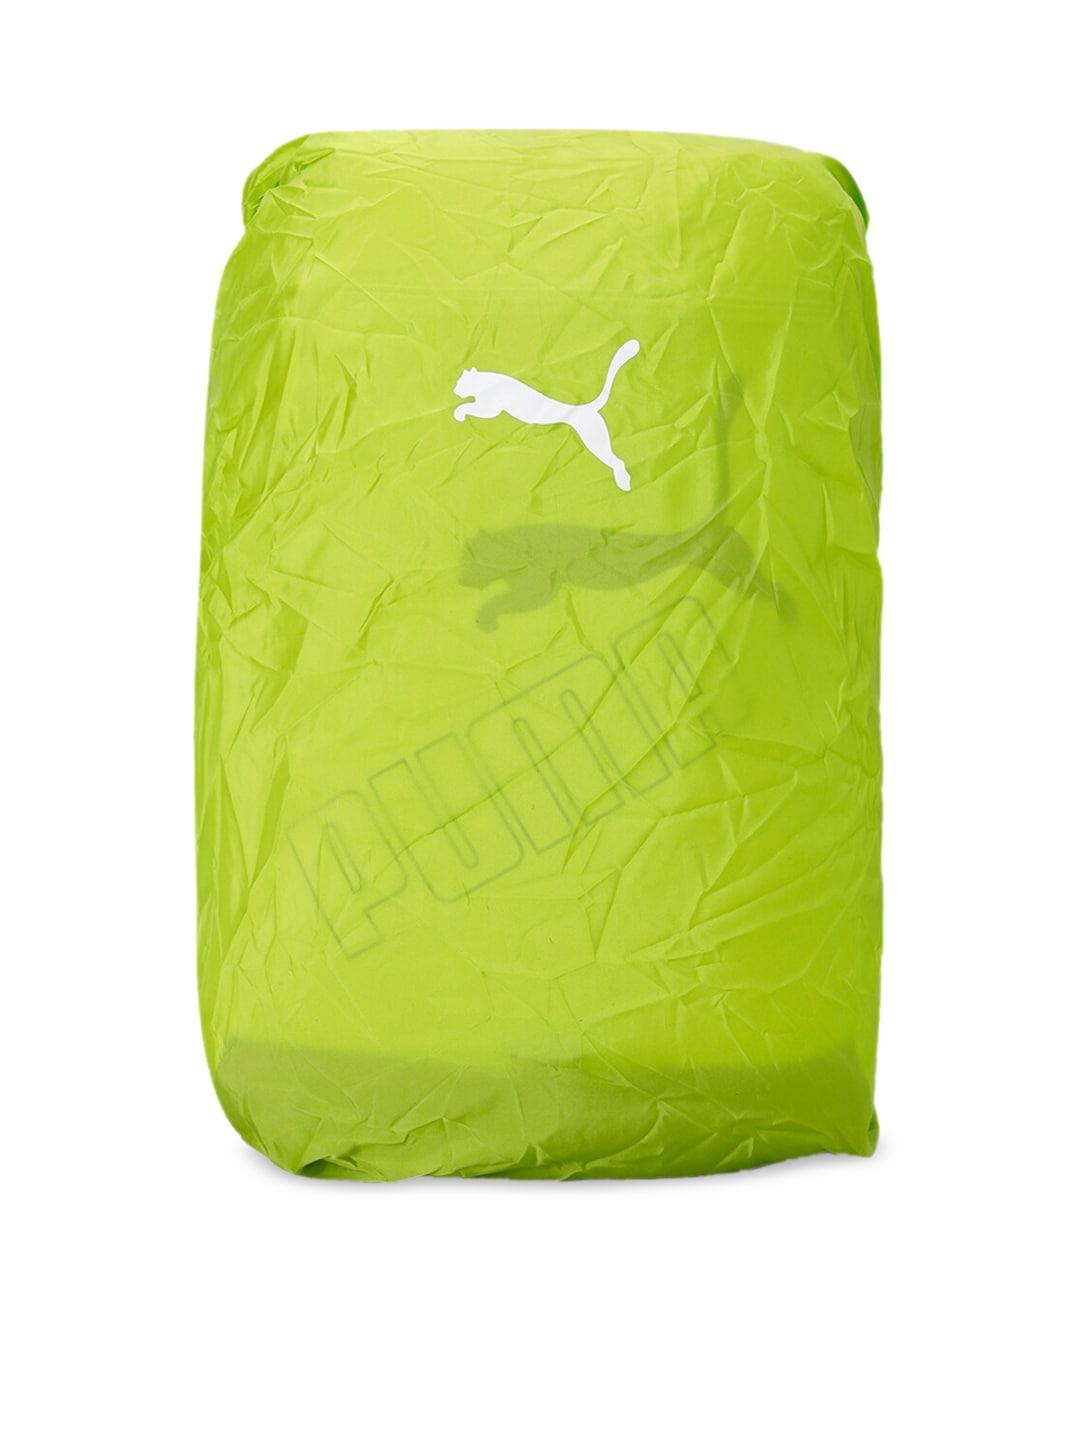 puma-unisex-lime-green-solid-packable-rain-cover